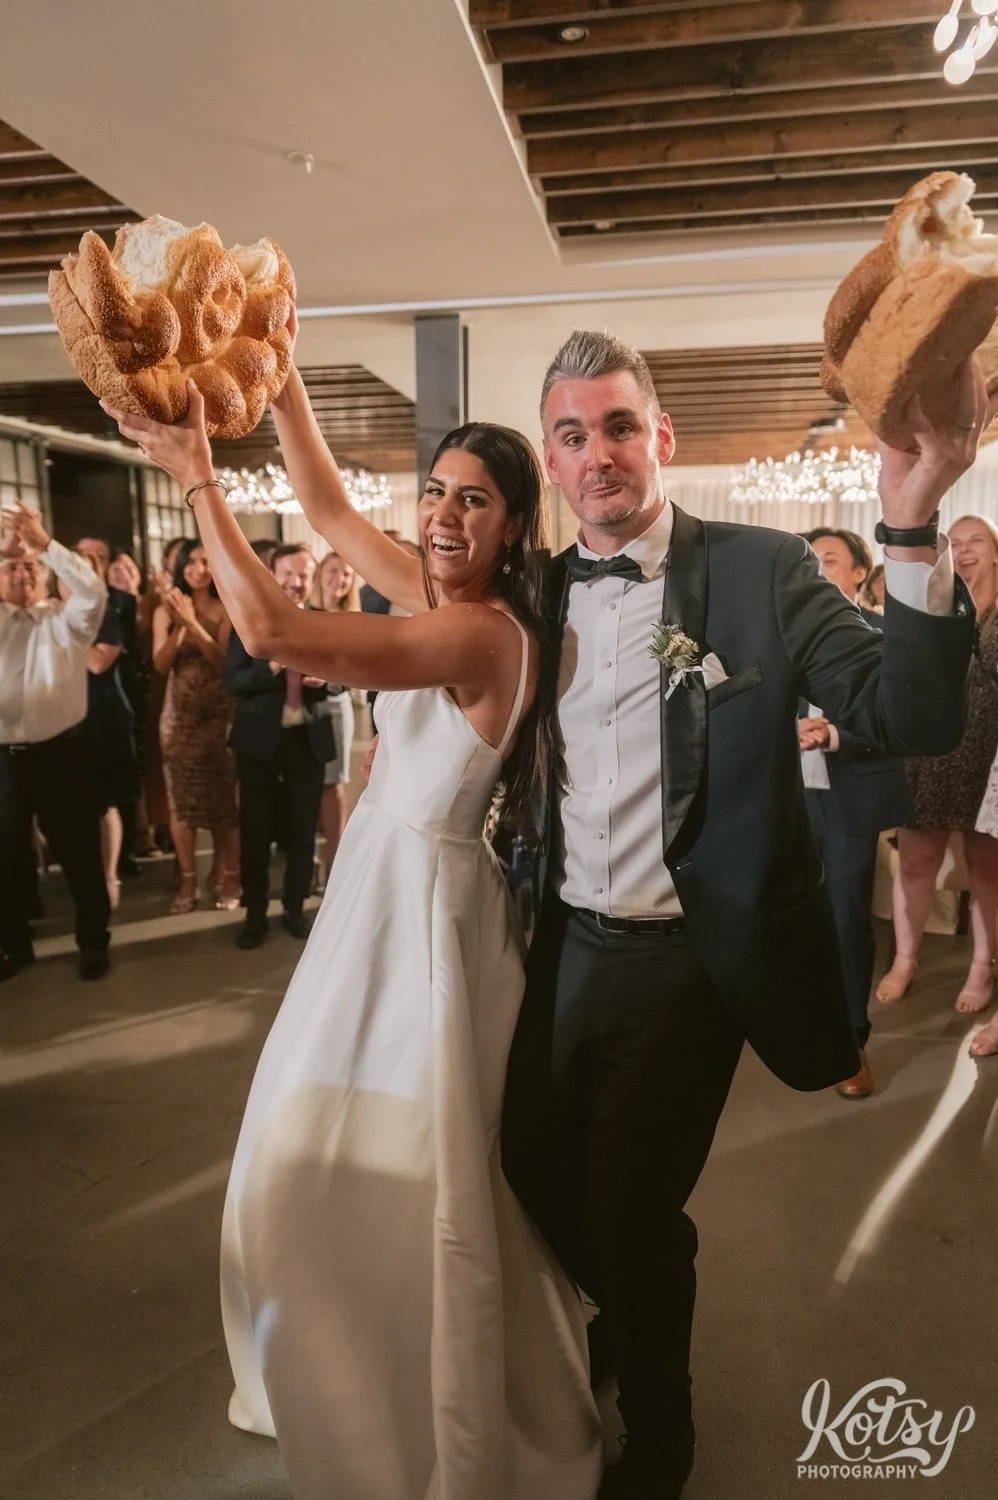 A bride and groom hold up their respective halves of bread after the Macedonian breaking of the bread ceremony at their Village Loft wedding reception in Toronto, Canada